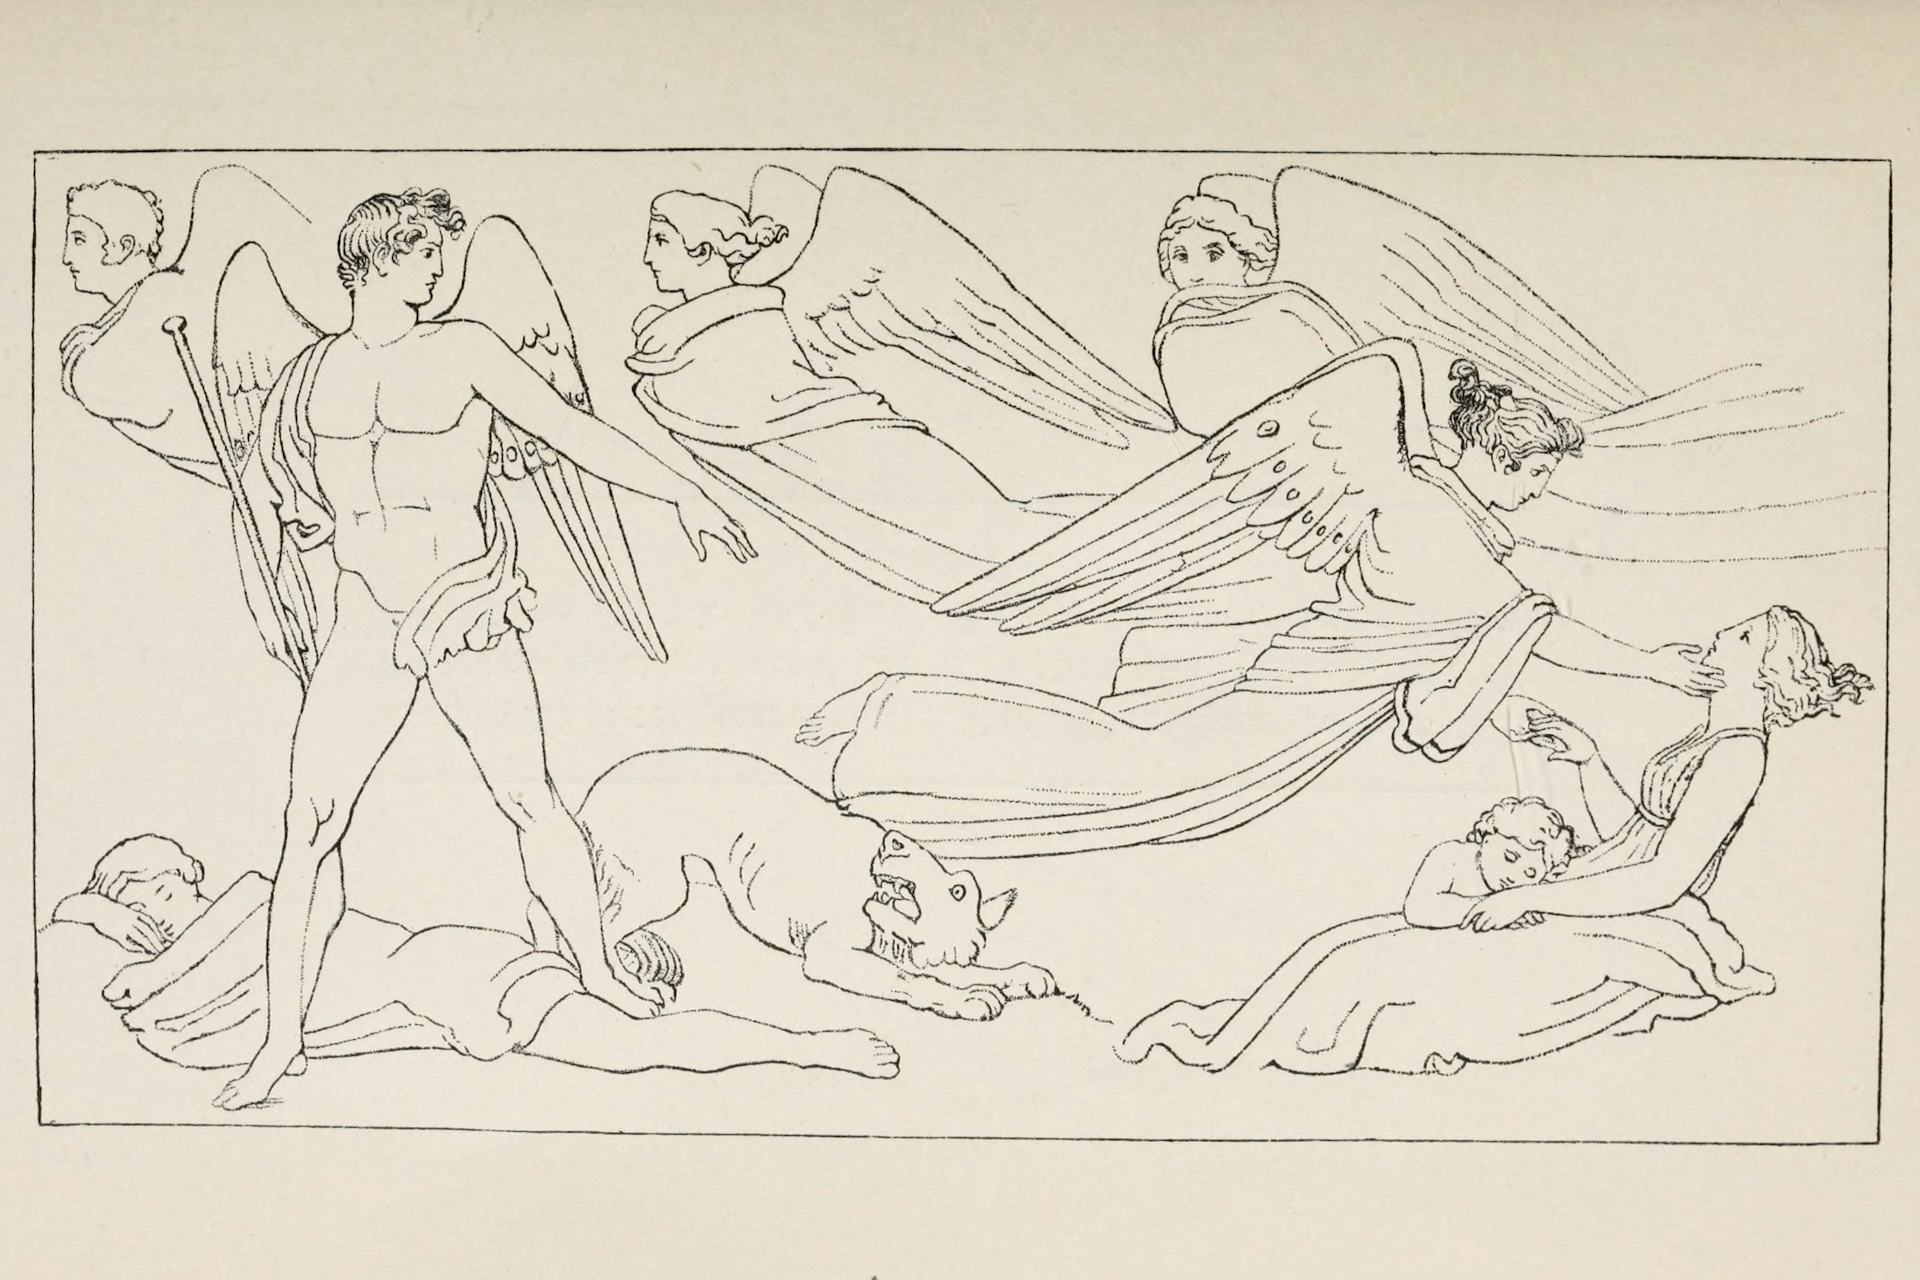 Illustration showing the souls of Hesiod’s Golden Race as daemons.